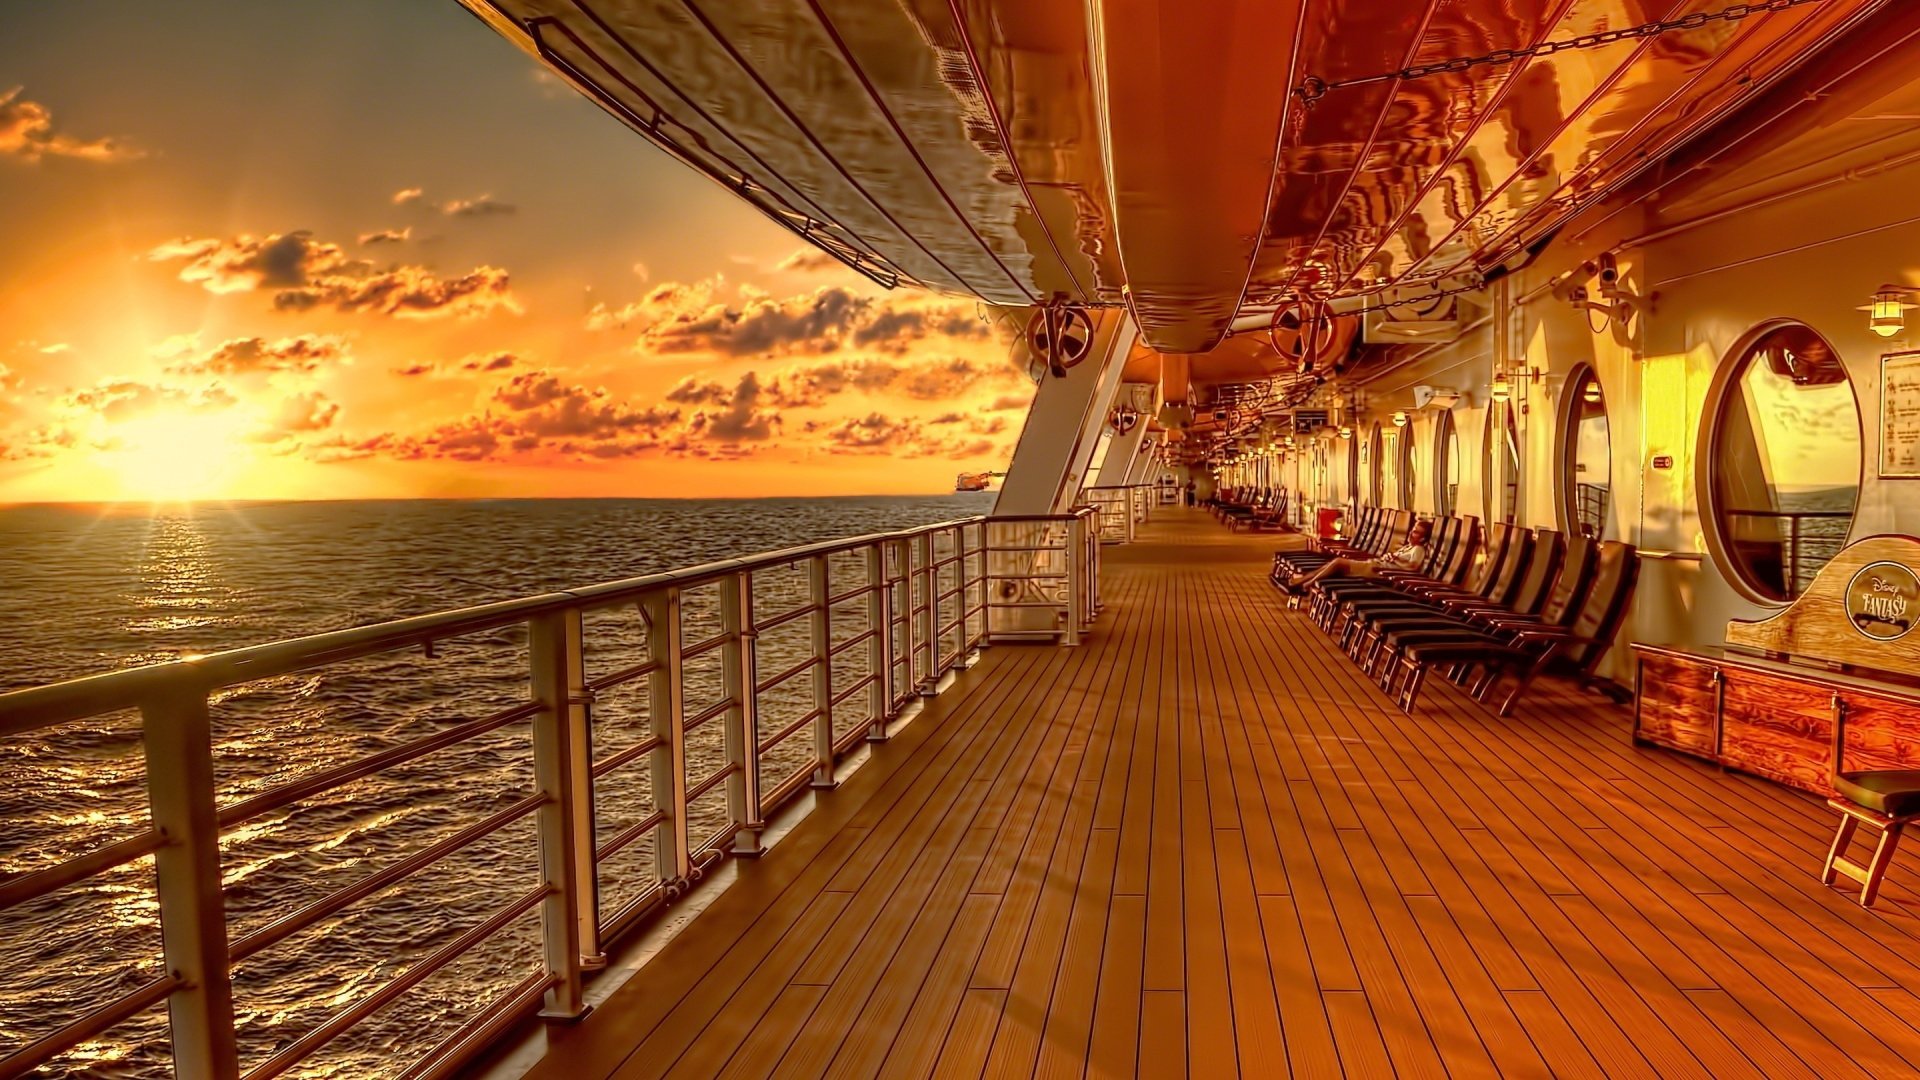 View of the Sunset from the Disney Fantasy Oceanliner Deck